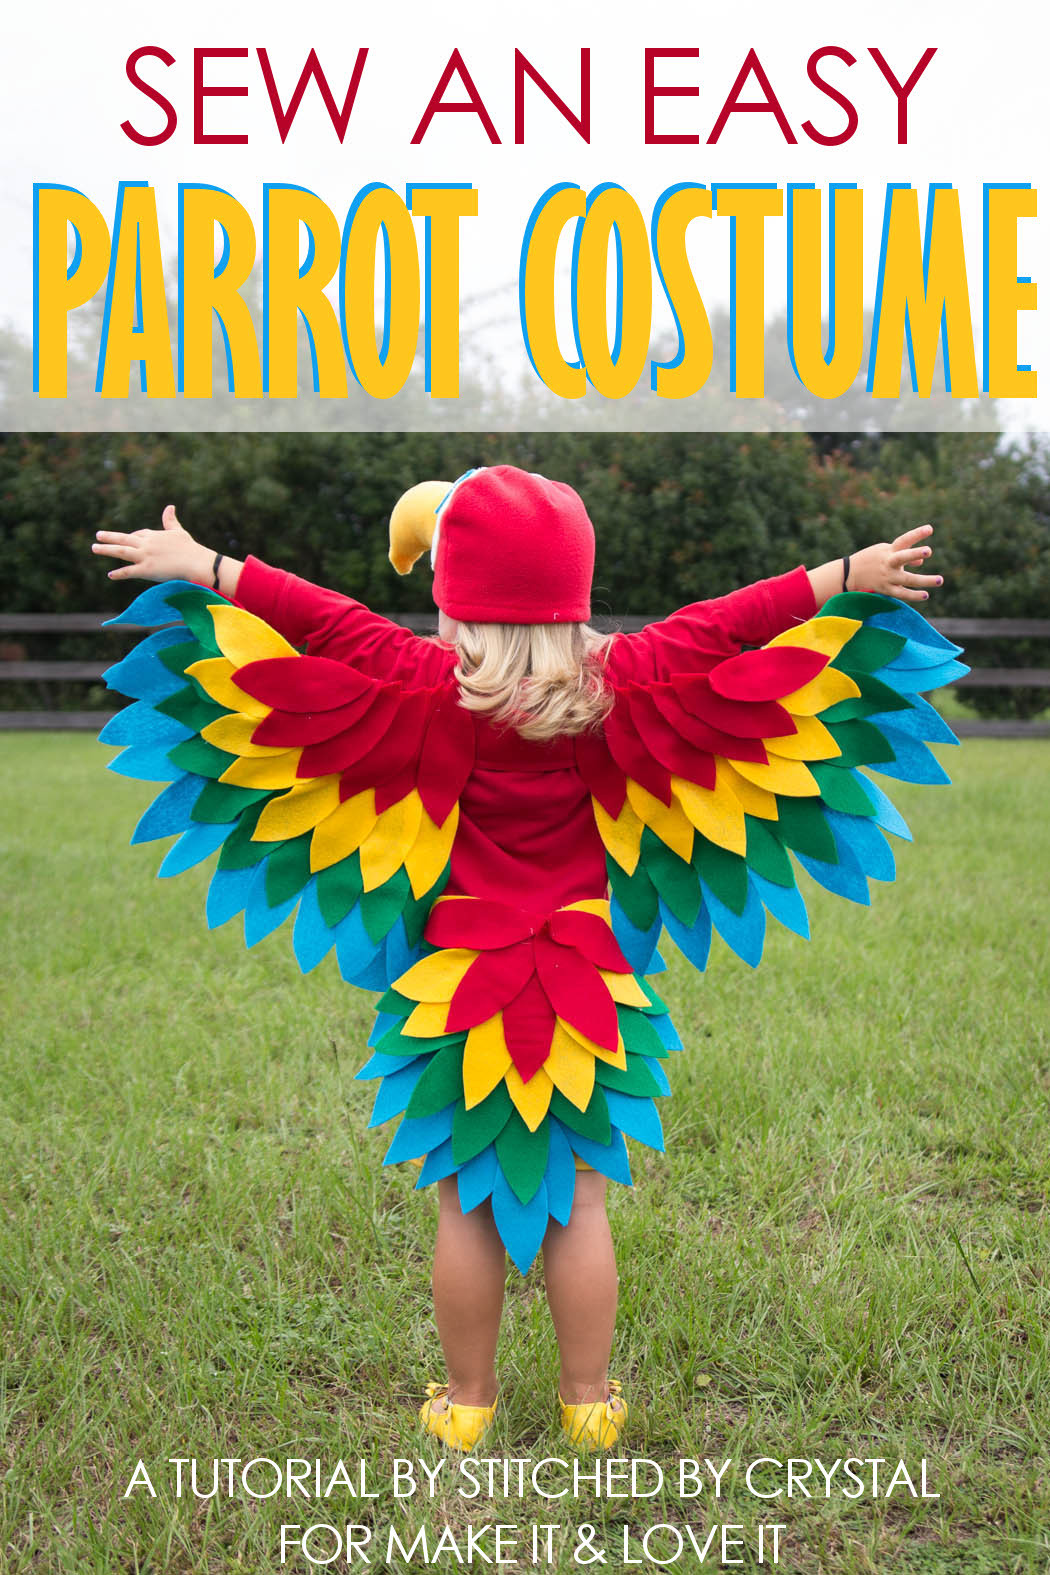 Parrot Costume DIY
 Parrot Costume DIY How to Make a Homemade Parrot Costume